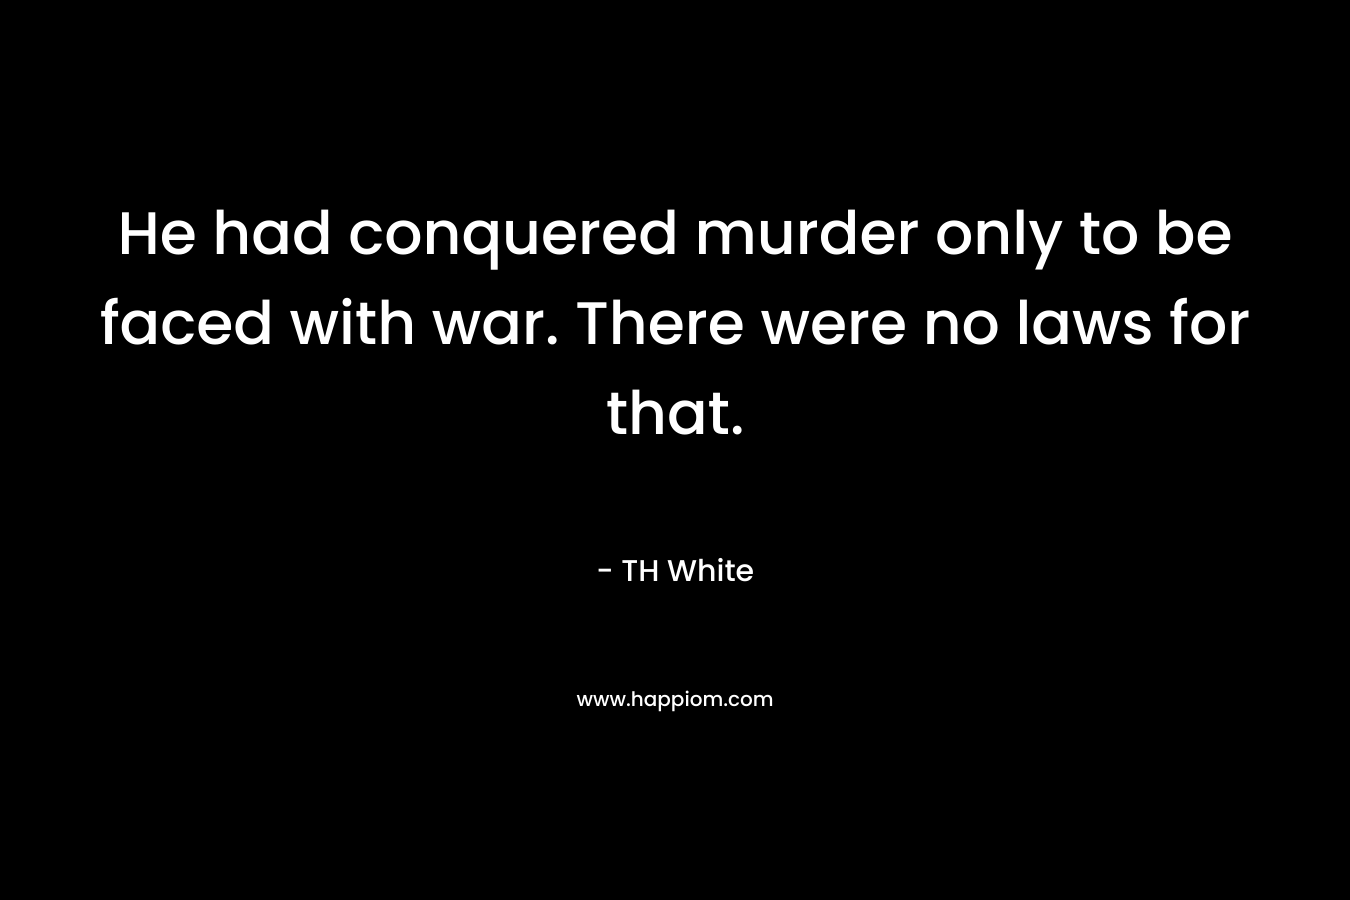 He had conquered murder only to be faced with war. There were no laws for that. – TH White